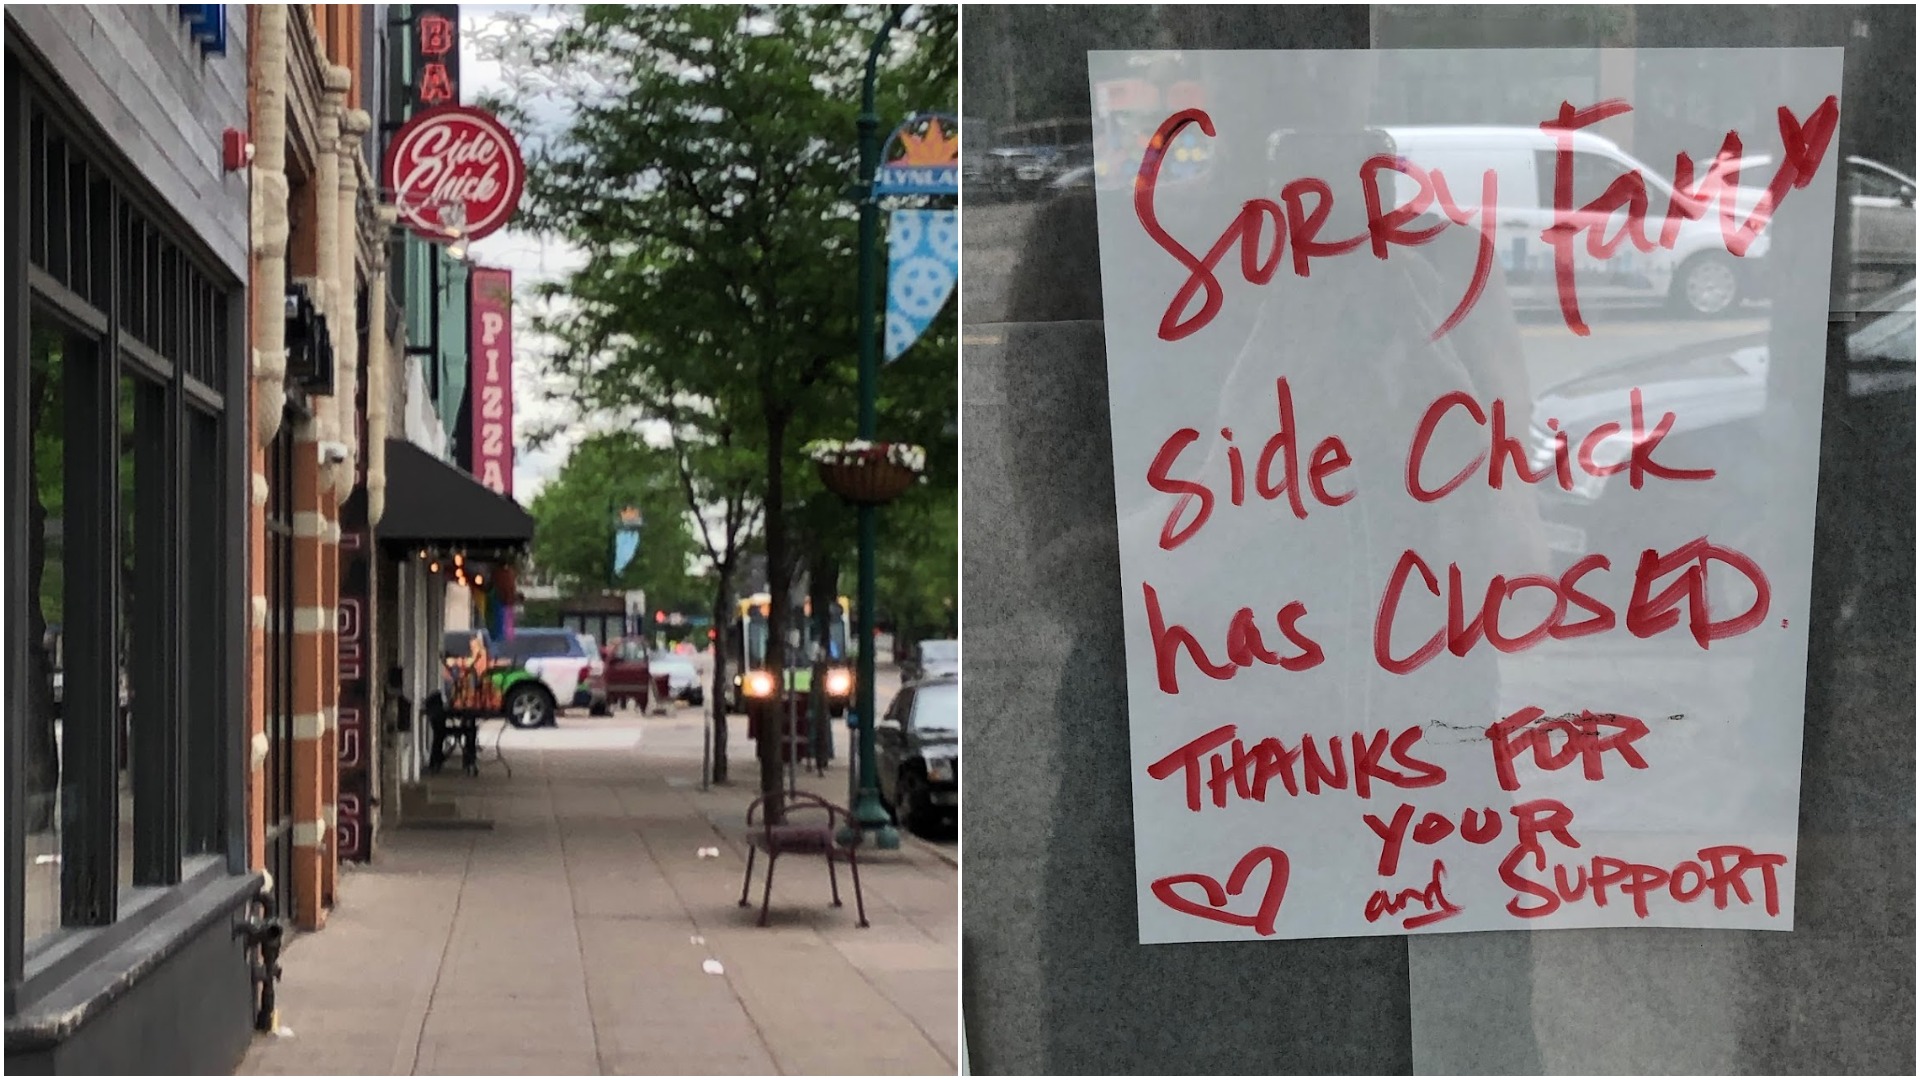 two side by side photos: on the left, side chick's sign as viewed from the street, and on the right, the sign in their window reading "sorry fam, side chick has closed. thanks for your love and support."